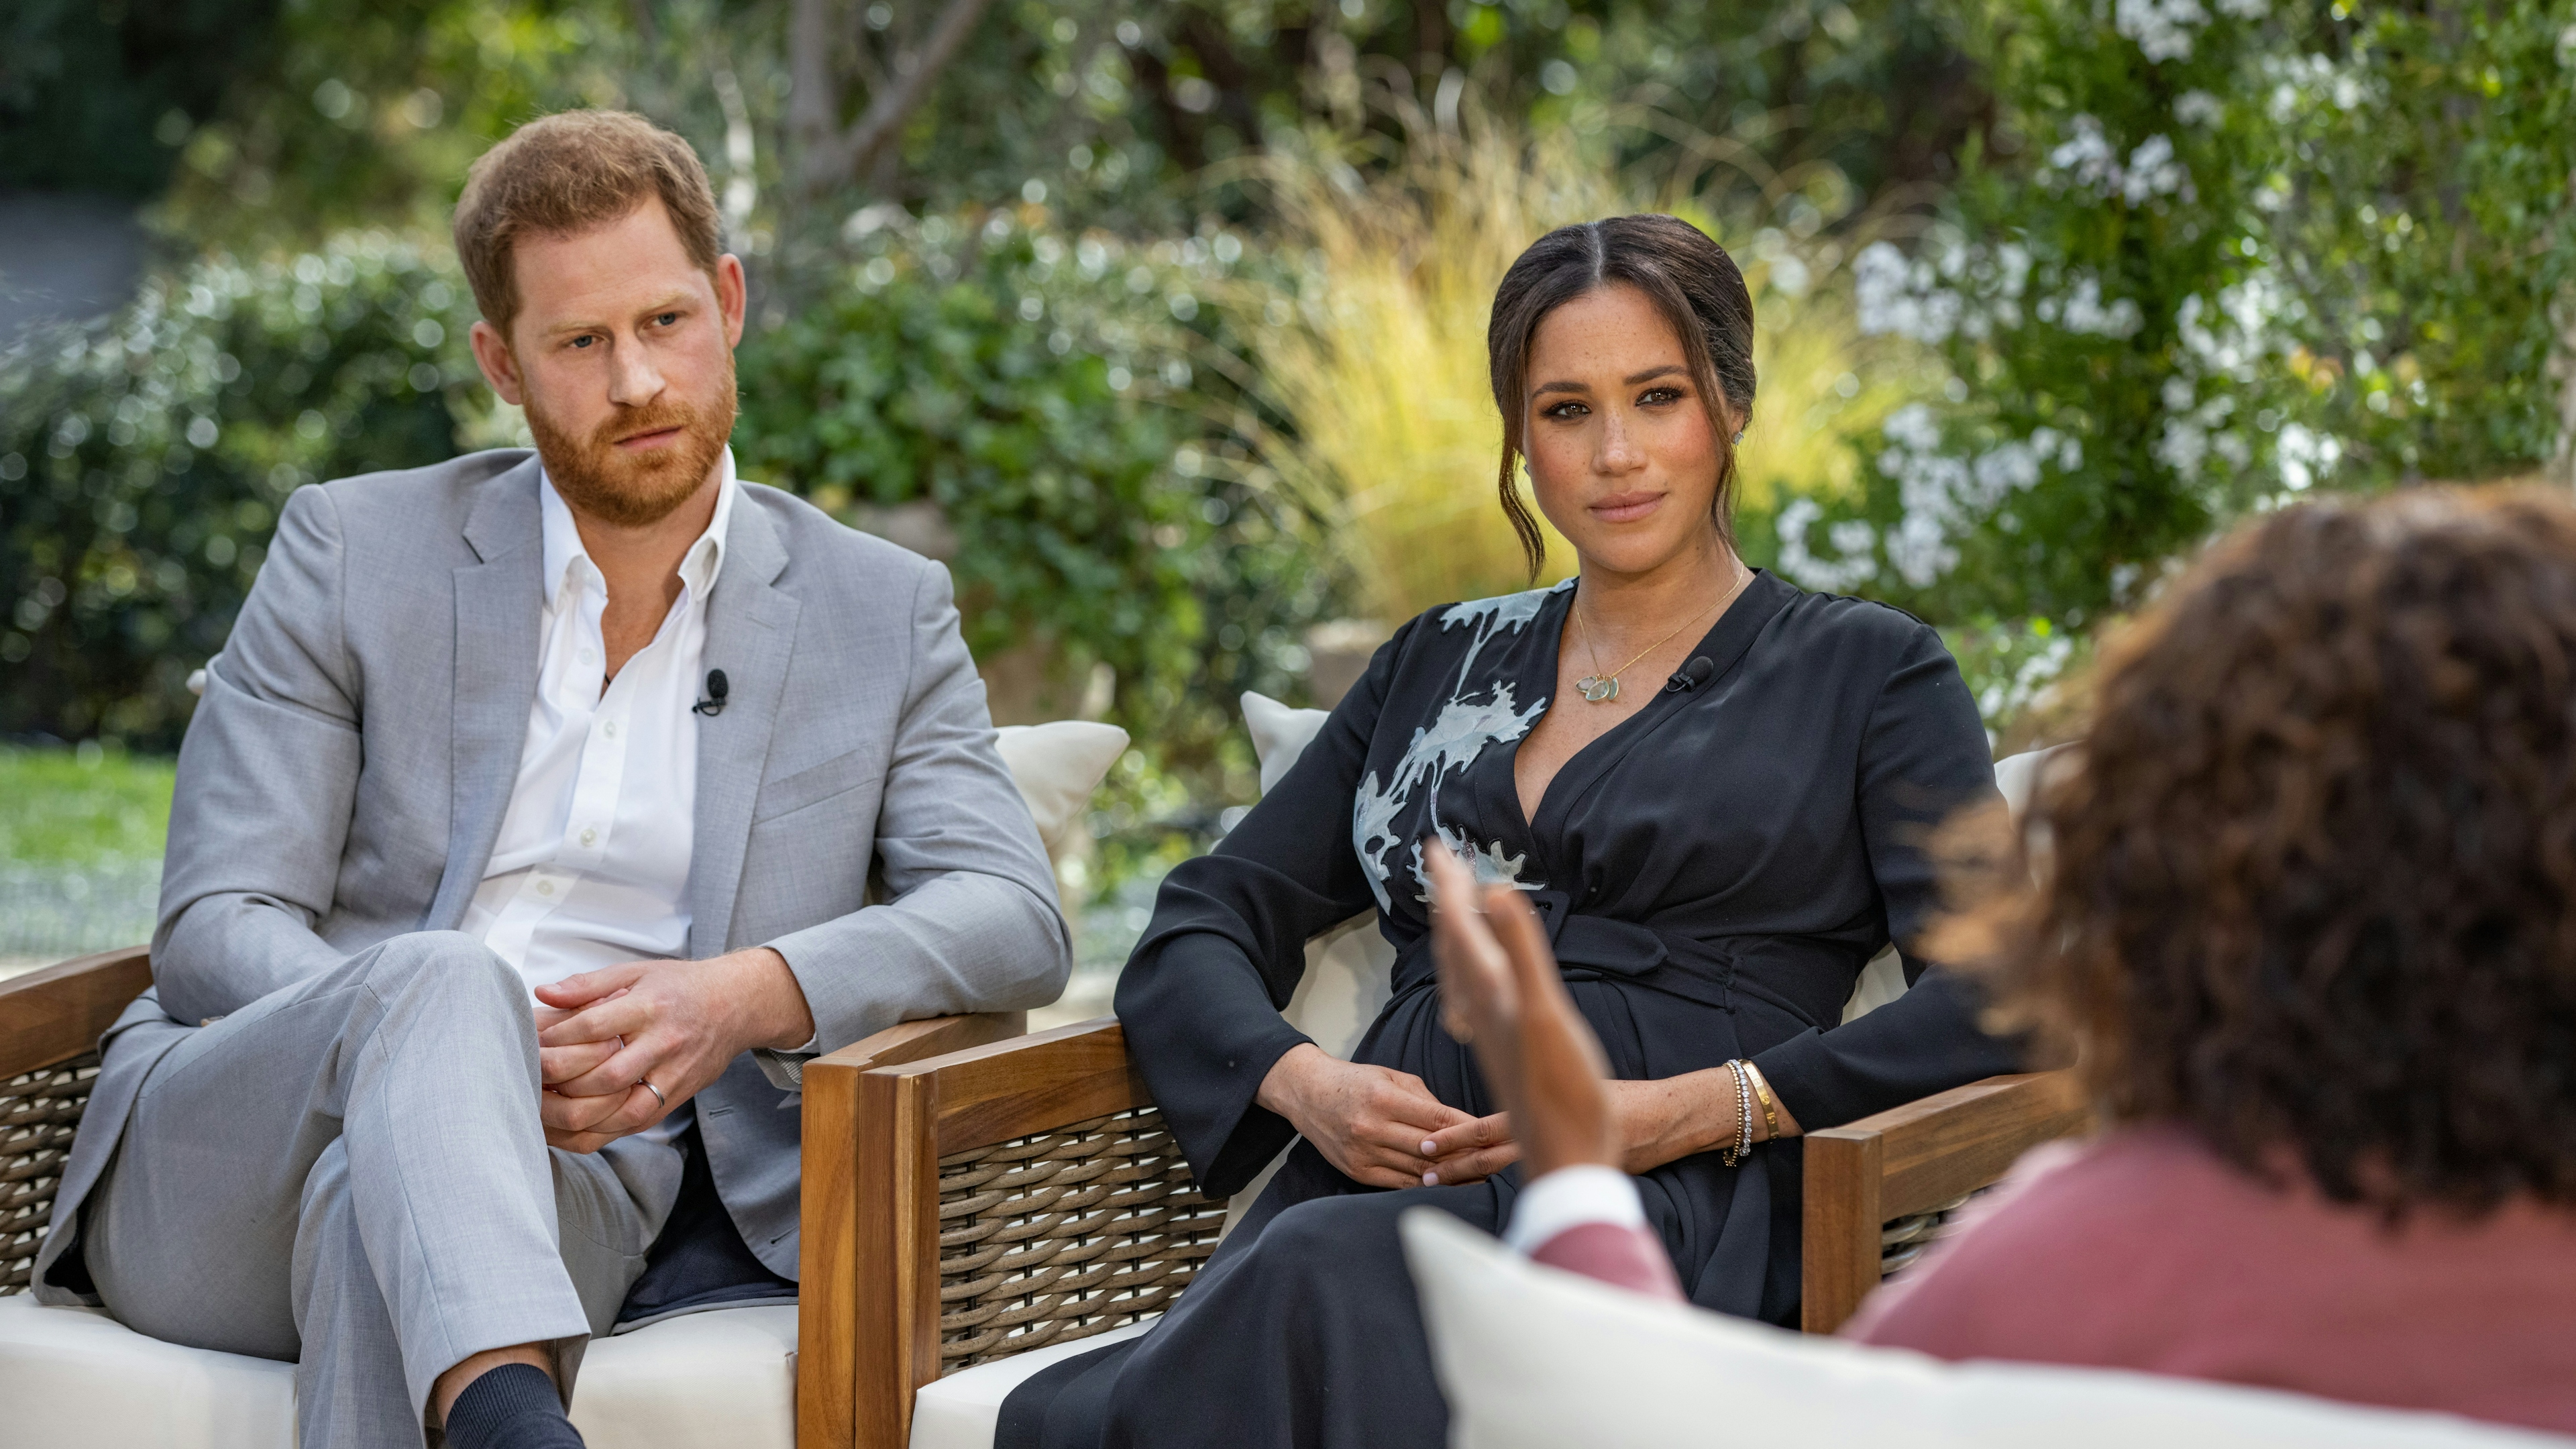 In this handout image provided by Harpo Productions and released on March 5, 2021, Oprah Winfrey interviews Prince Harry and Meghan Markle.